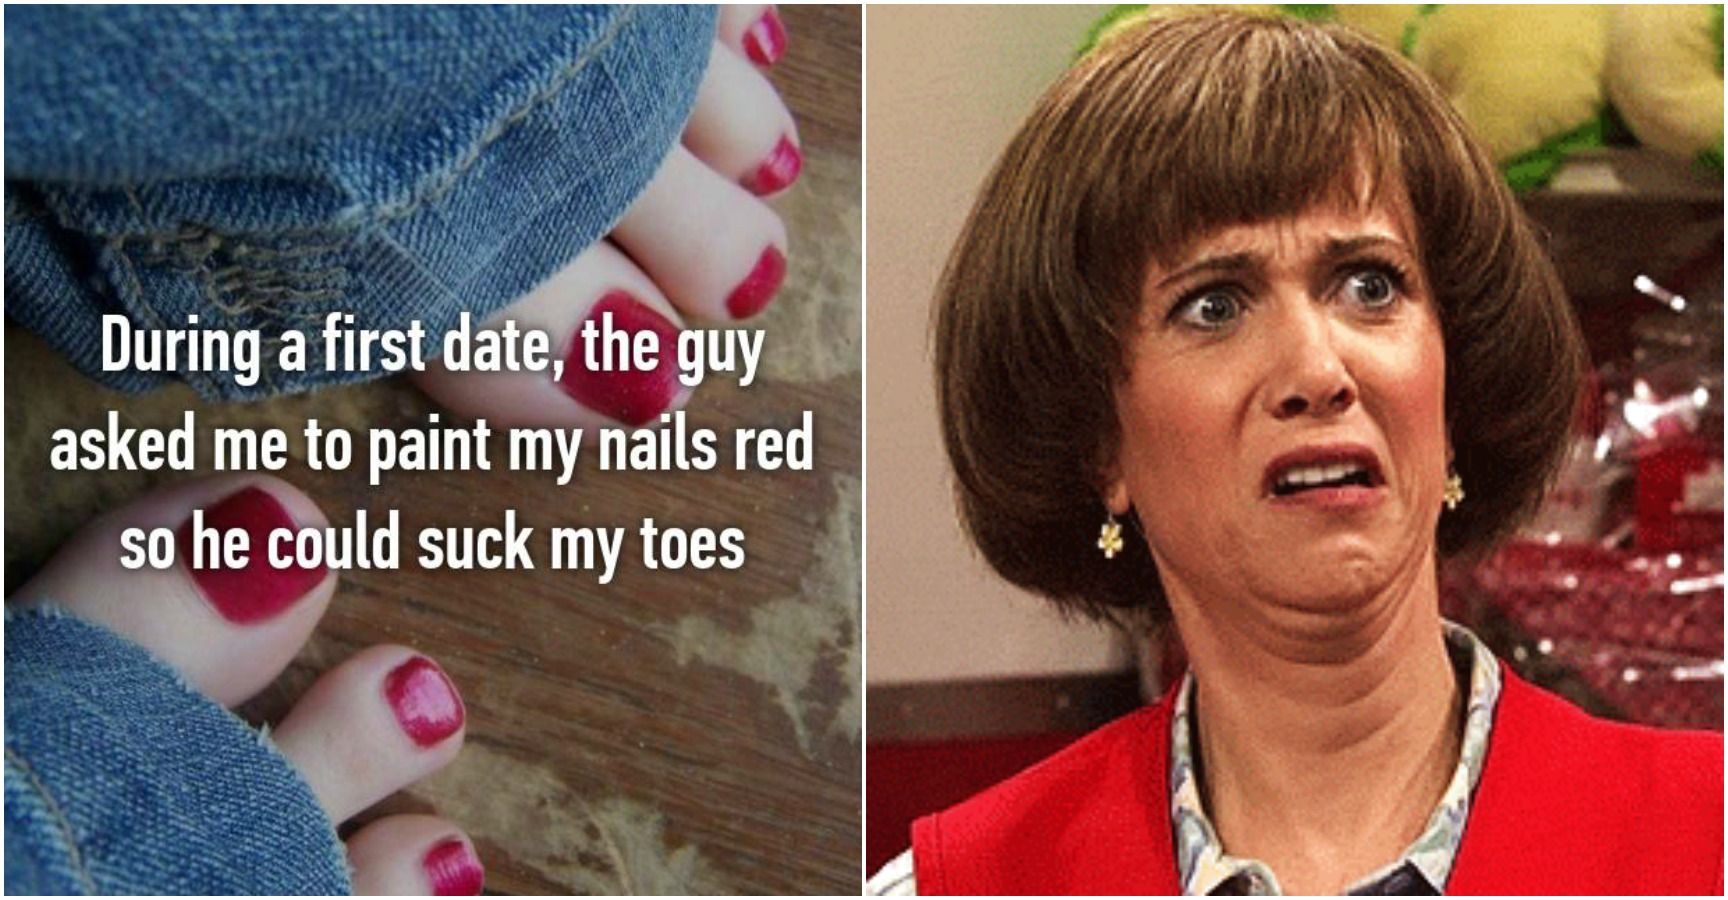 15 Whisper Confessions About Dates That Went Horribly Wrong 2916